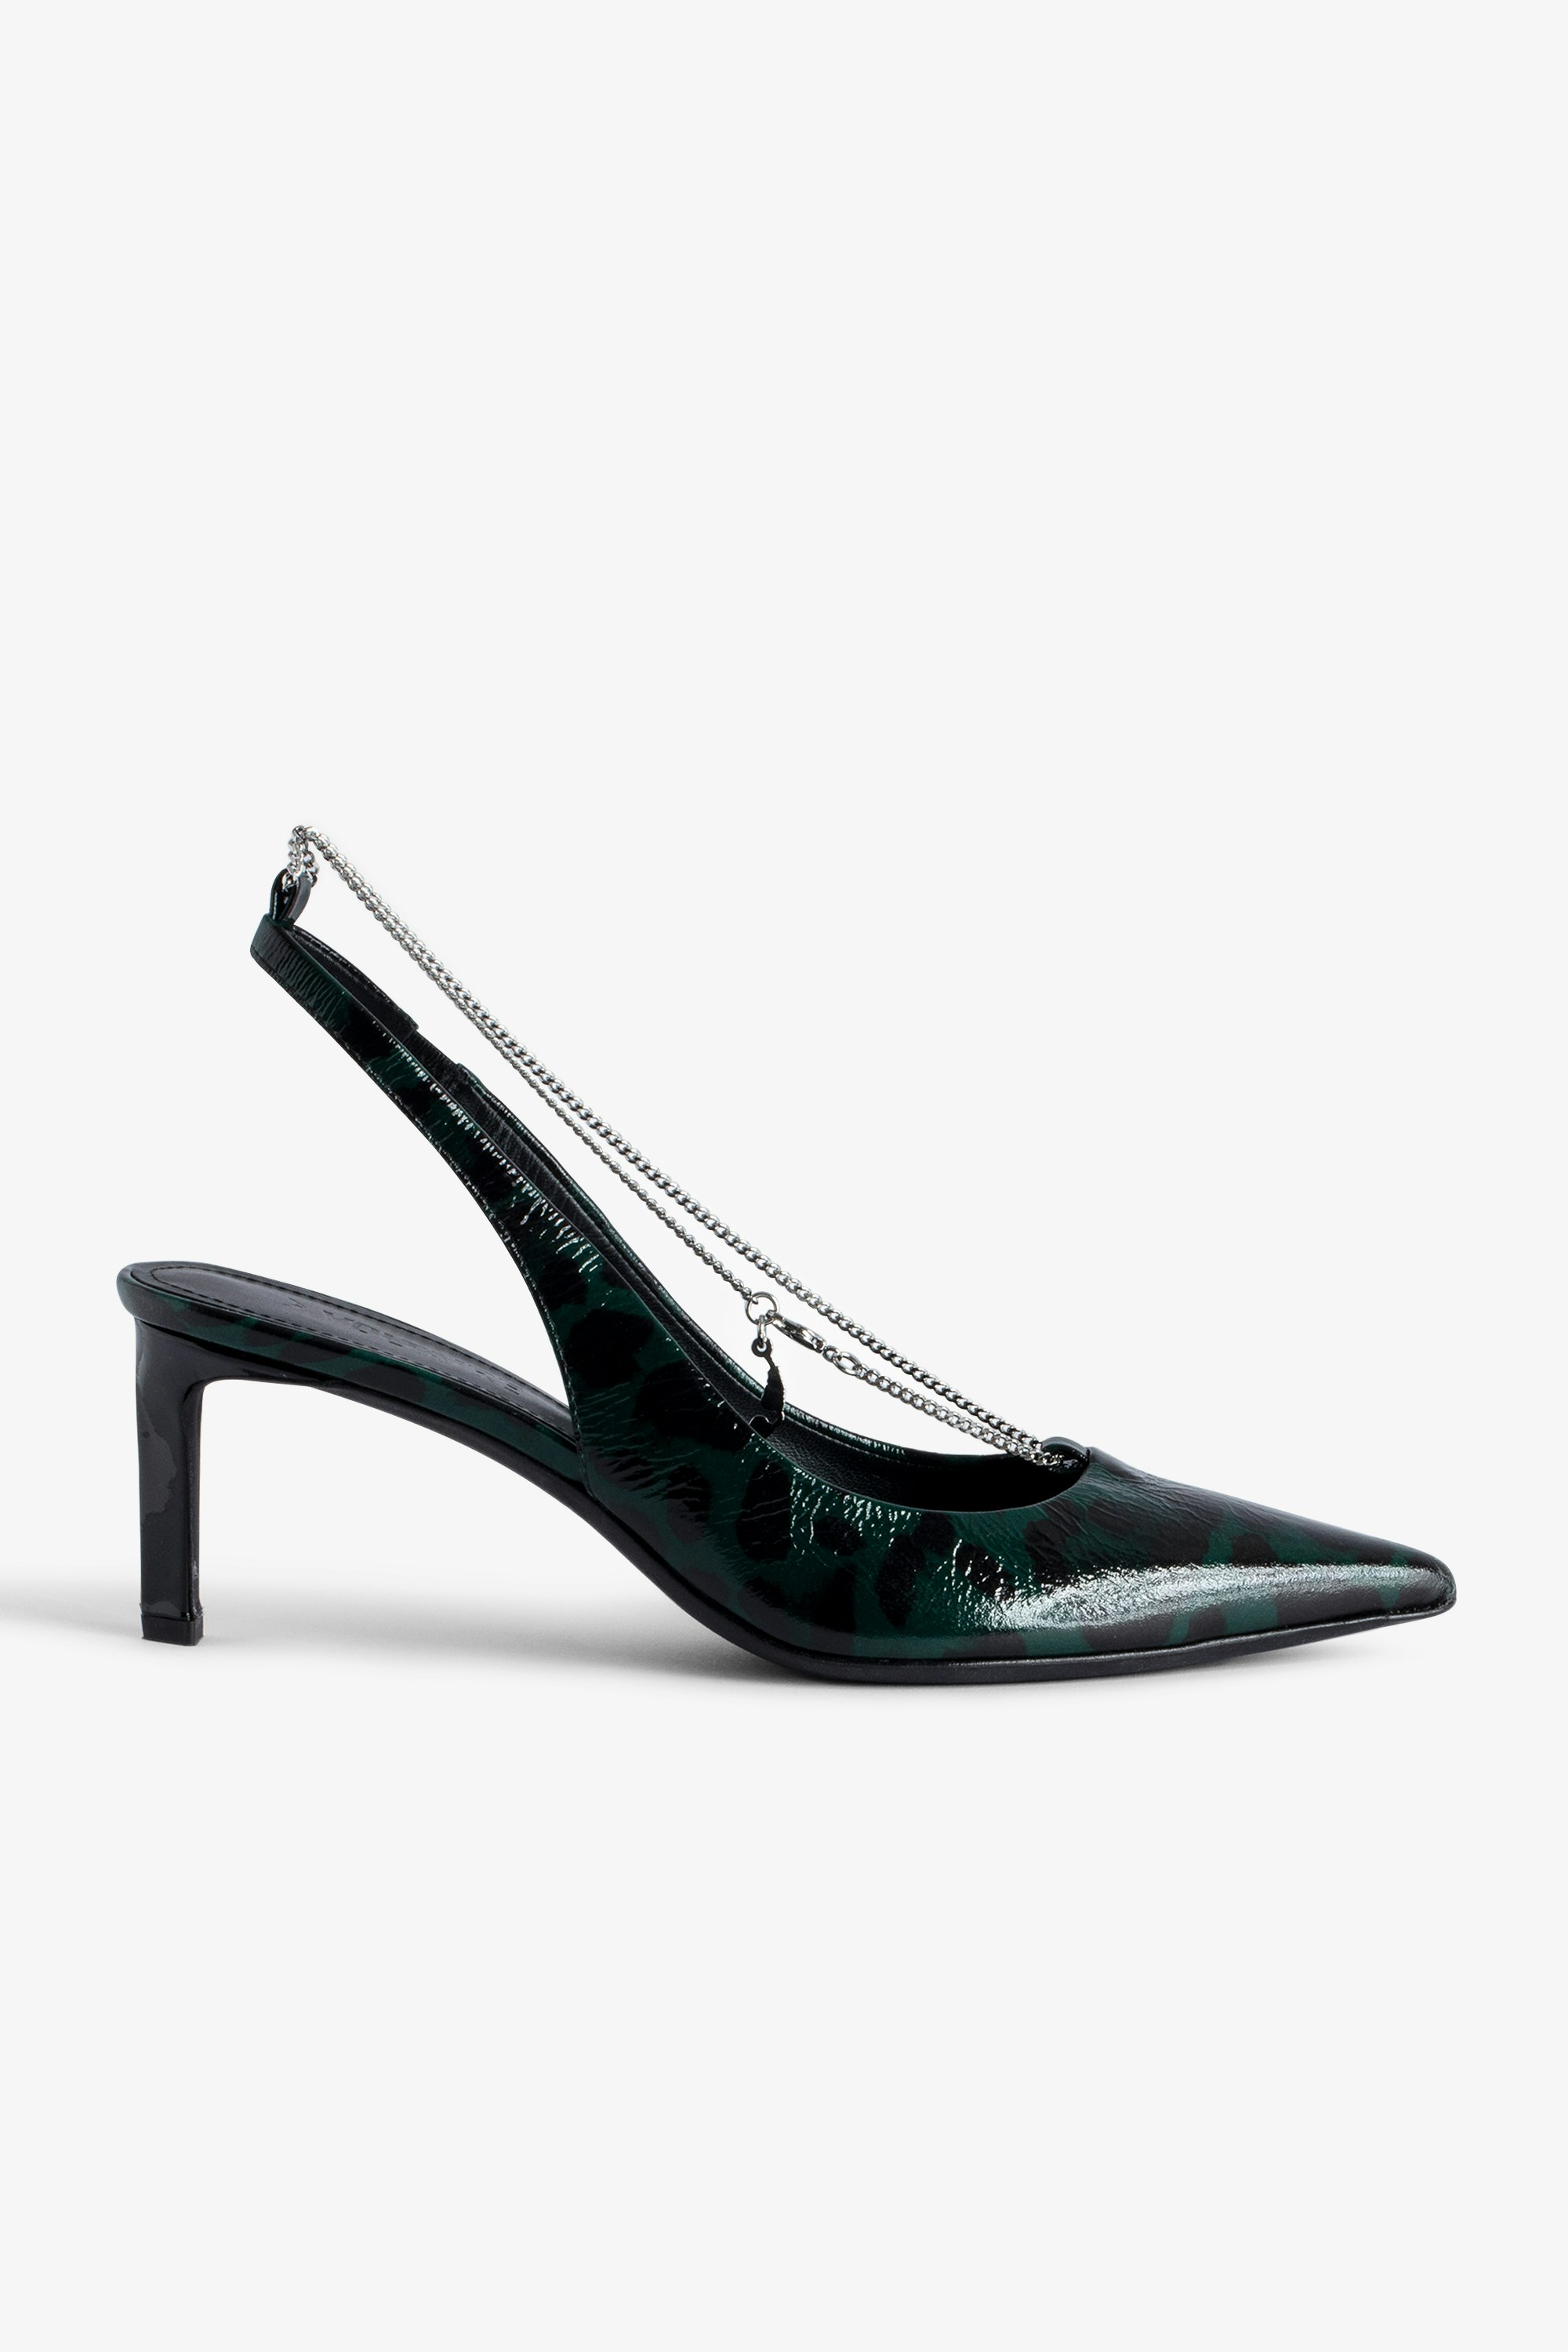 First Night Court Shoes Women’s green leopard-print patent leather court shoes with chain.